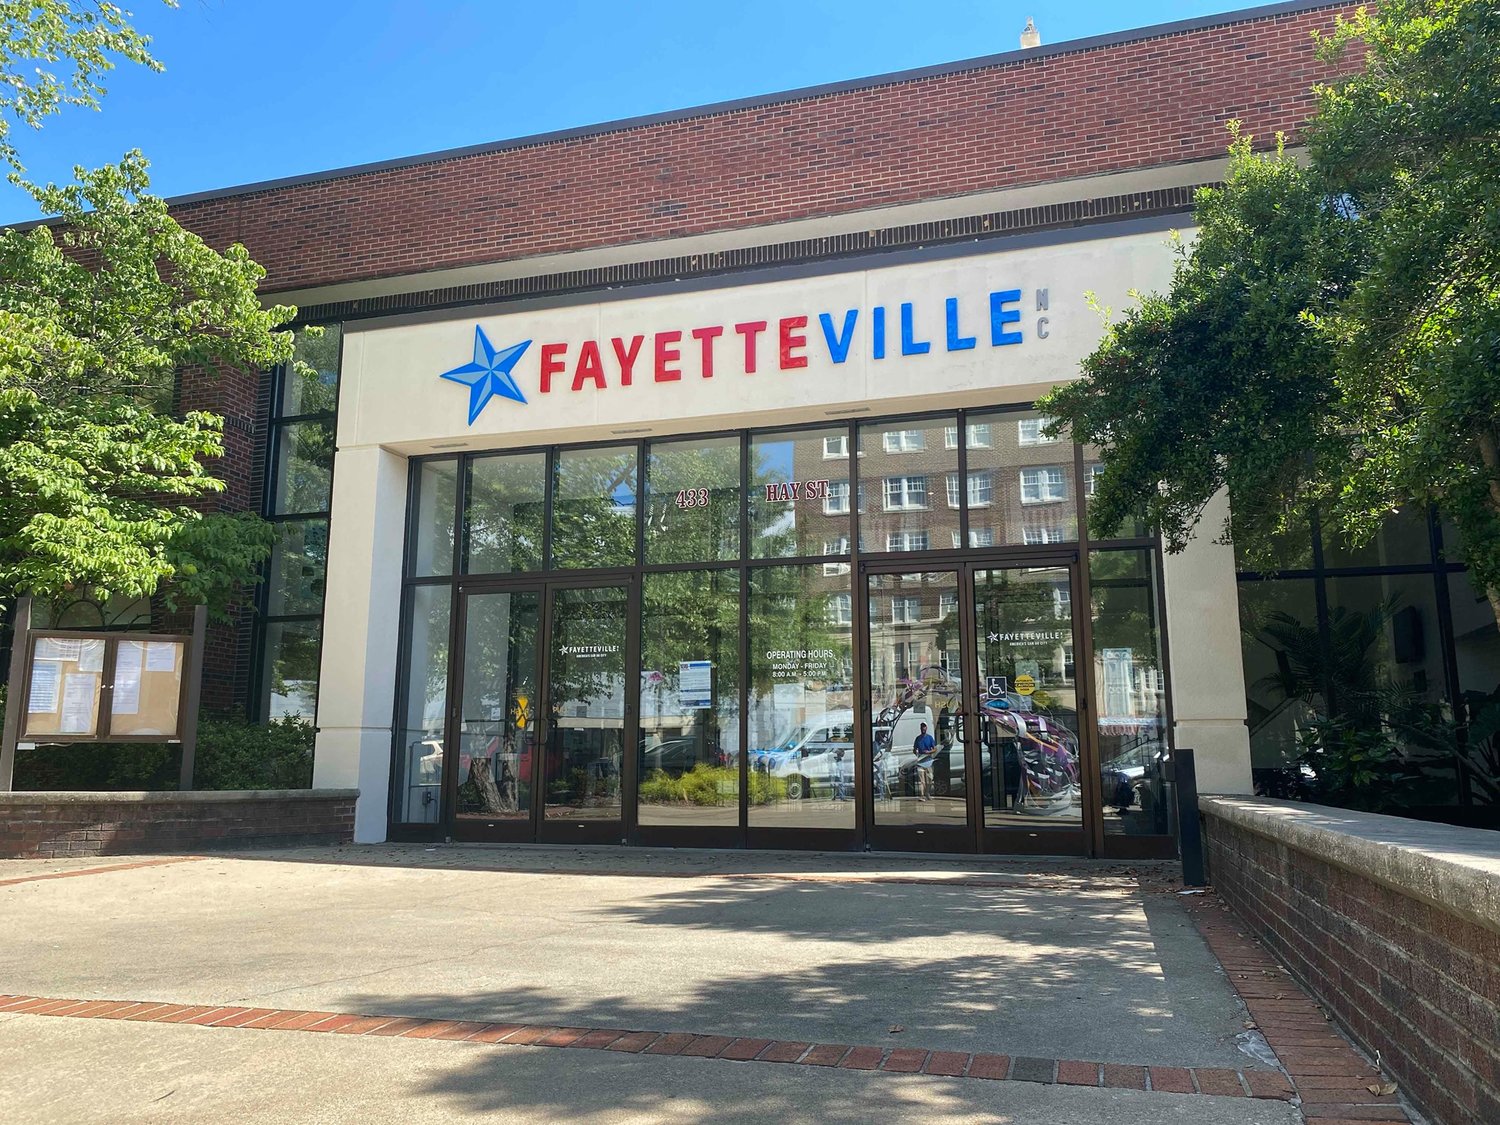 The Longleaf Pine Realtors Inc. and the Home Builders Association of Fayetteville say the City Council should find a meeting room large enough to accommodate the public.